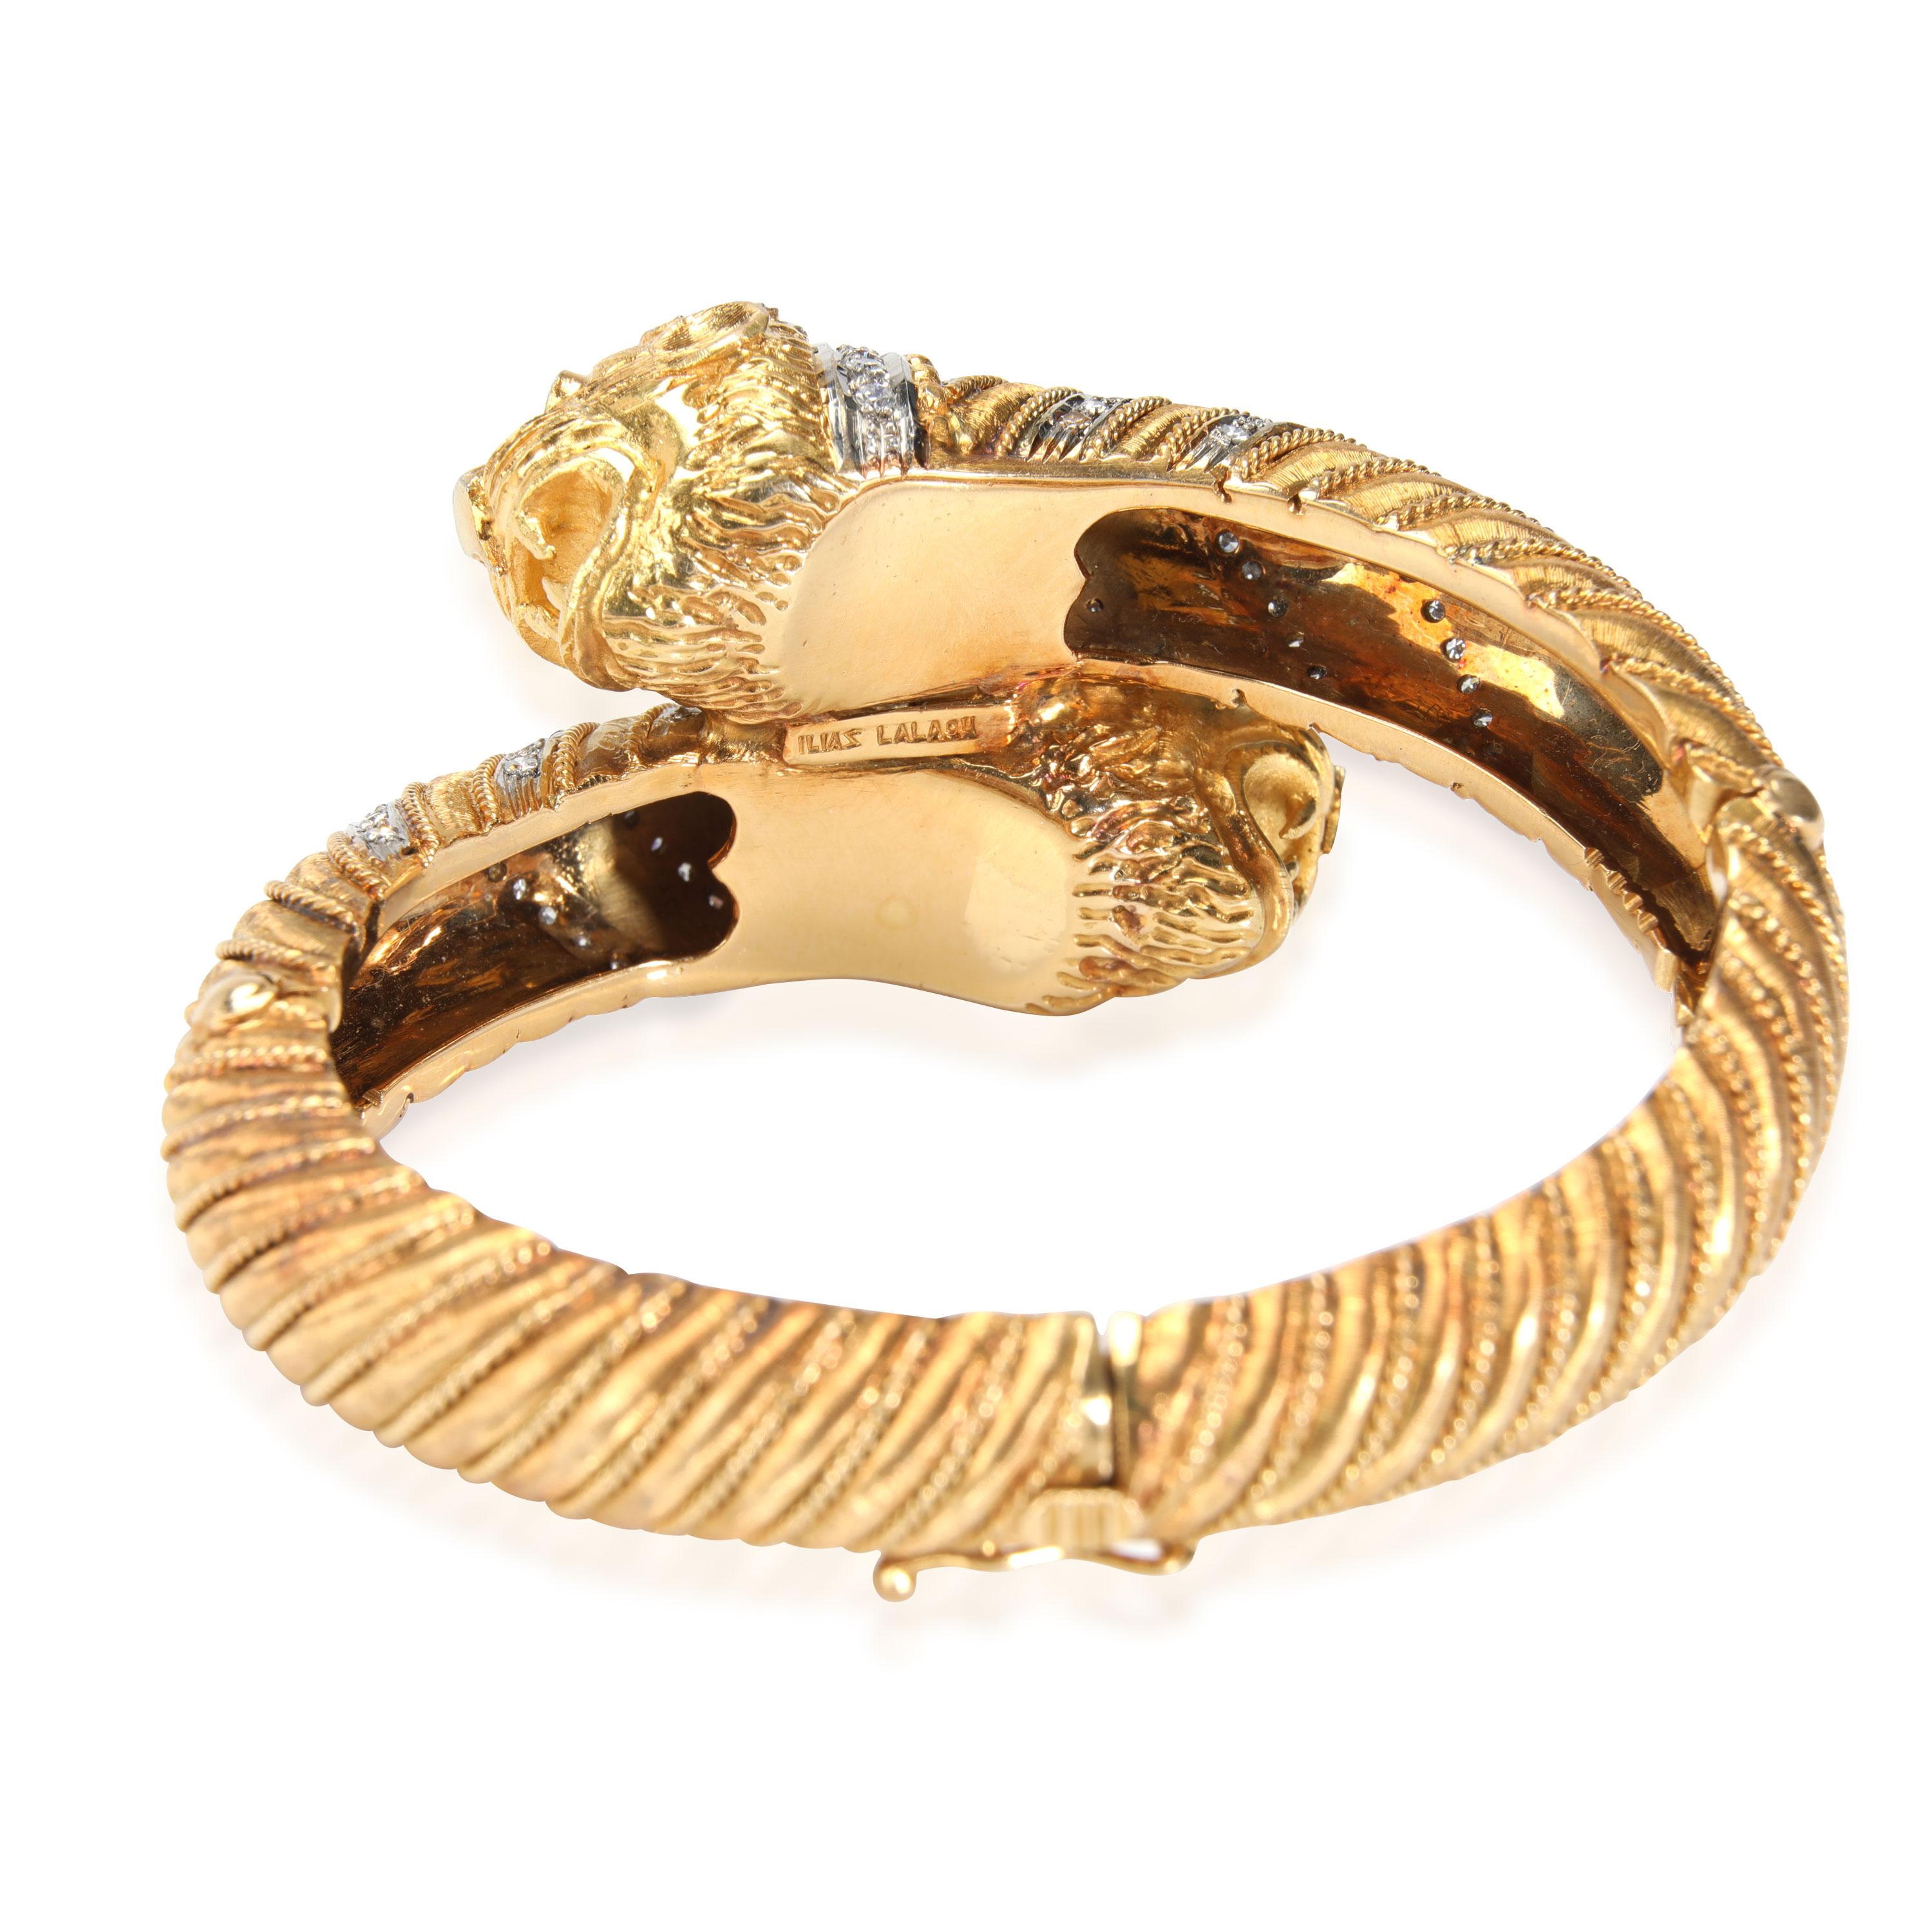 
Ilias Lalaounis 1980's Lion Bangle in 18K Yellow Gold 1 CTW

PRIMARY DETAILS
SKU: 112801
Listing Title: Ilias Lalaounis 1980's Lion Bangle in 18K Yellow Gold 1 CTW
Condition Description: Retails for 23000 USD. In excellent condition and recently